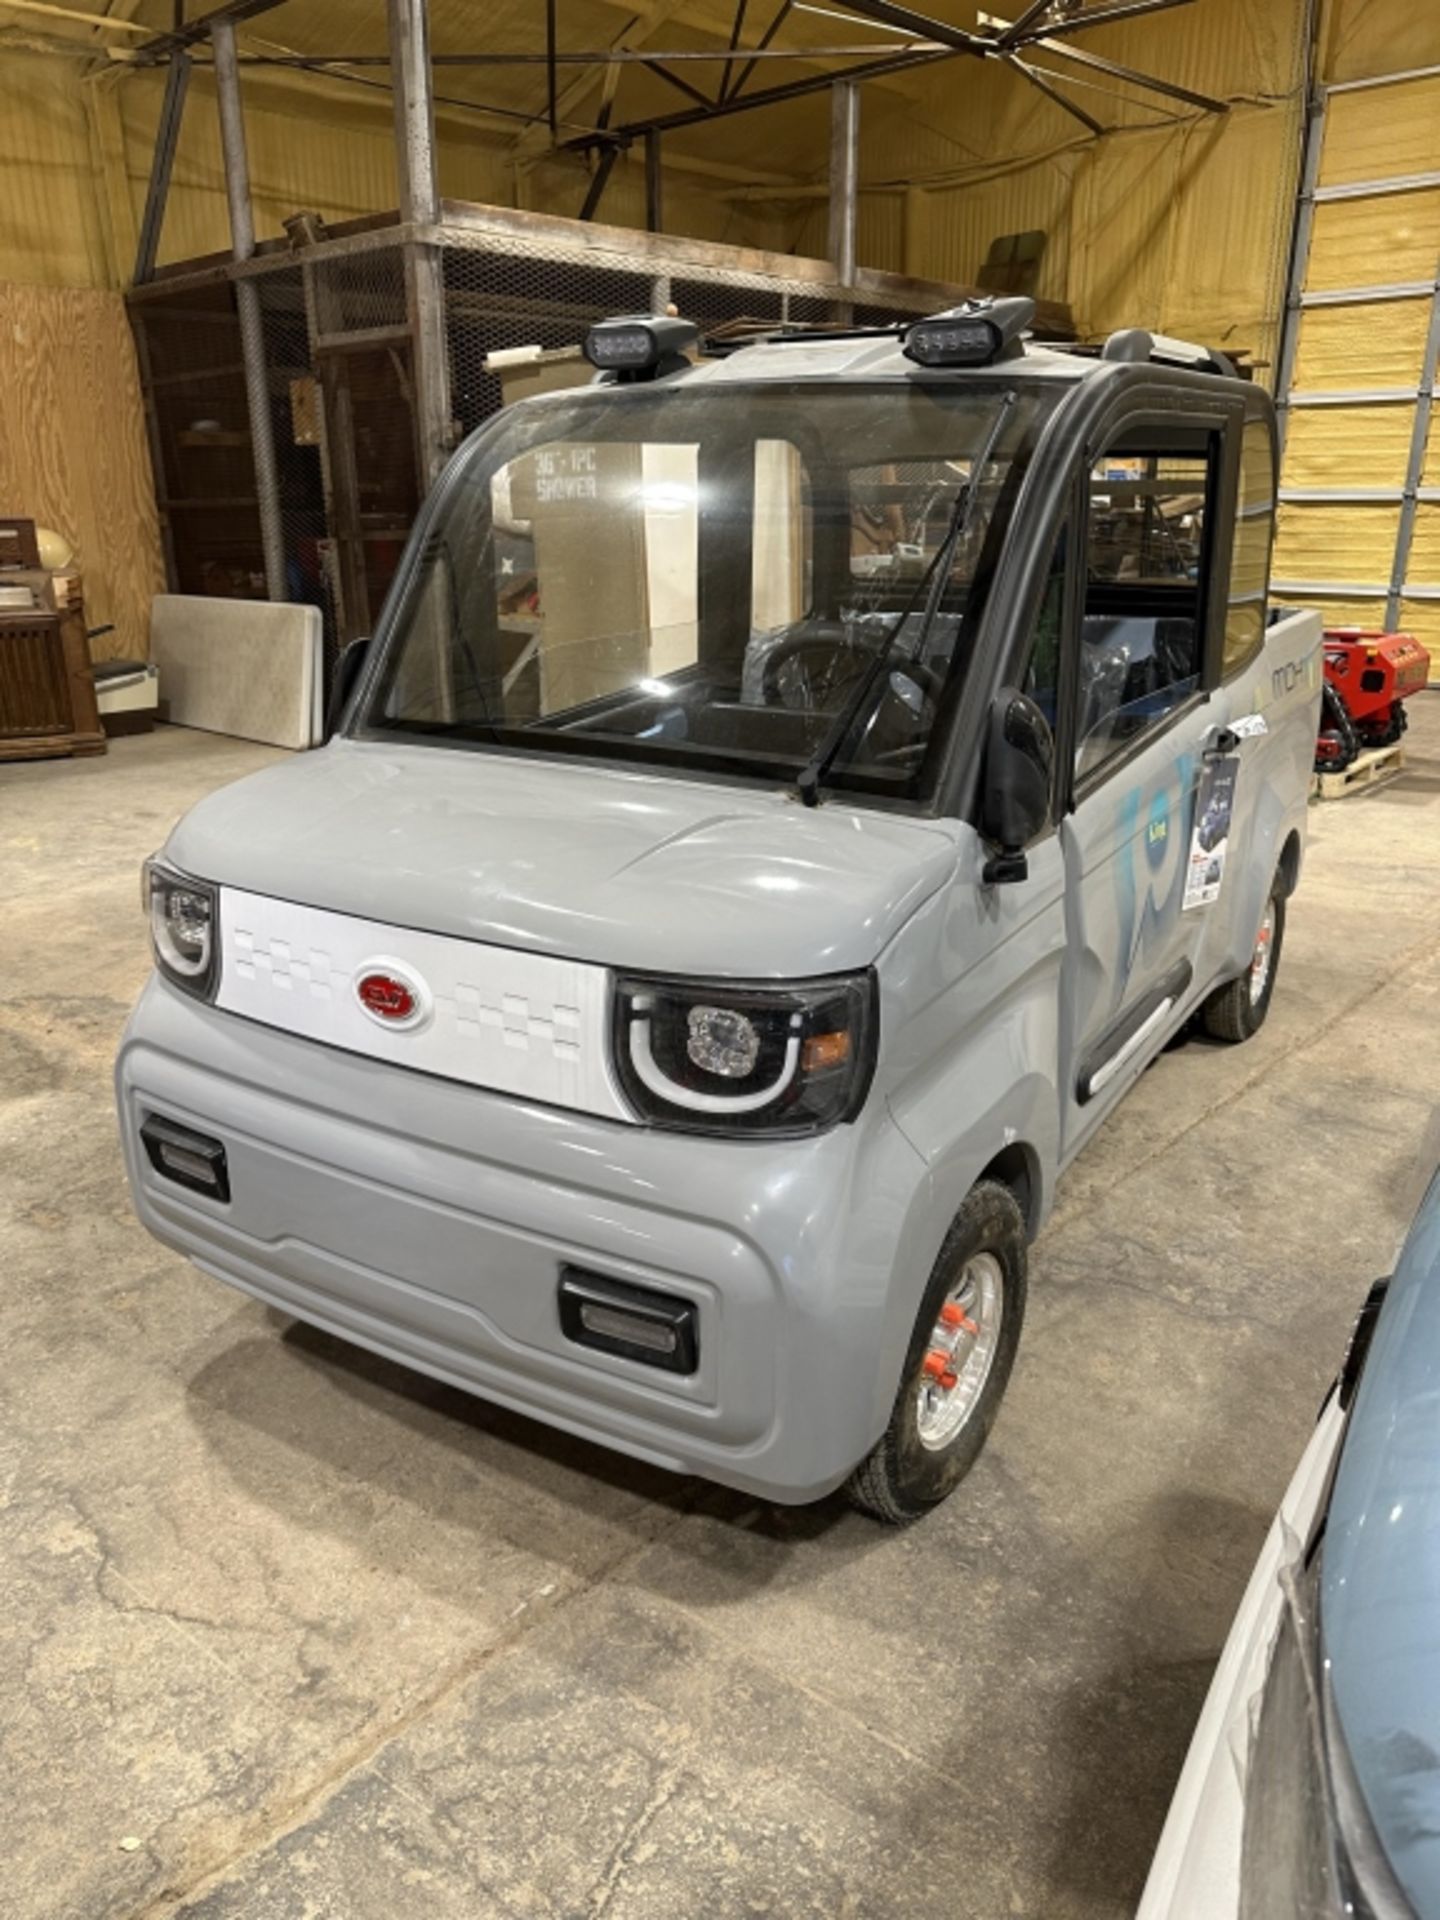 MECO 60 volt Electric Vehicle - Image 10 of 25